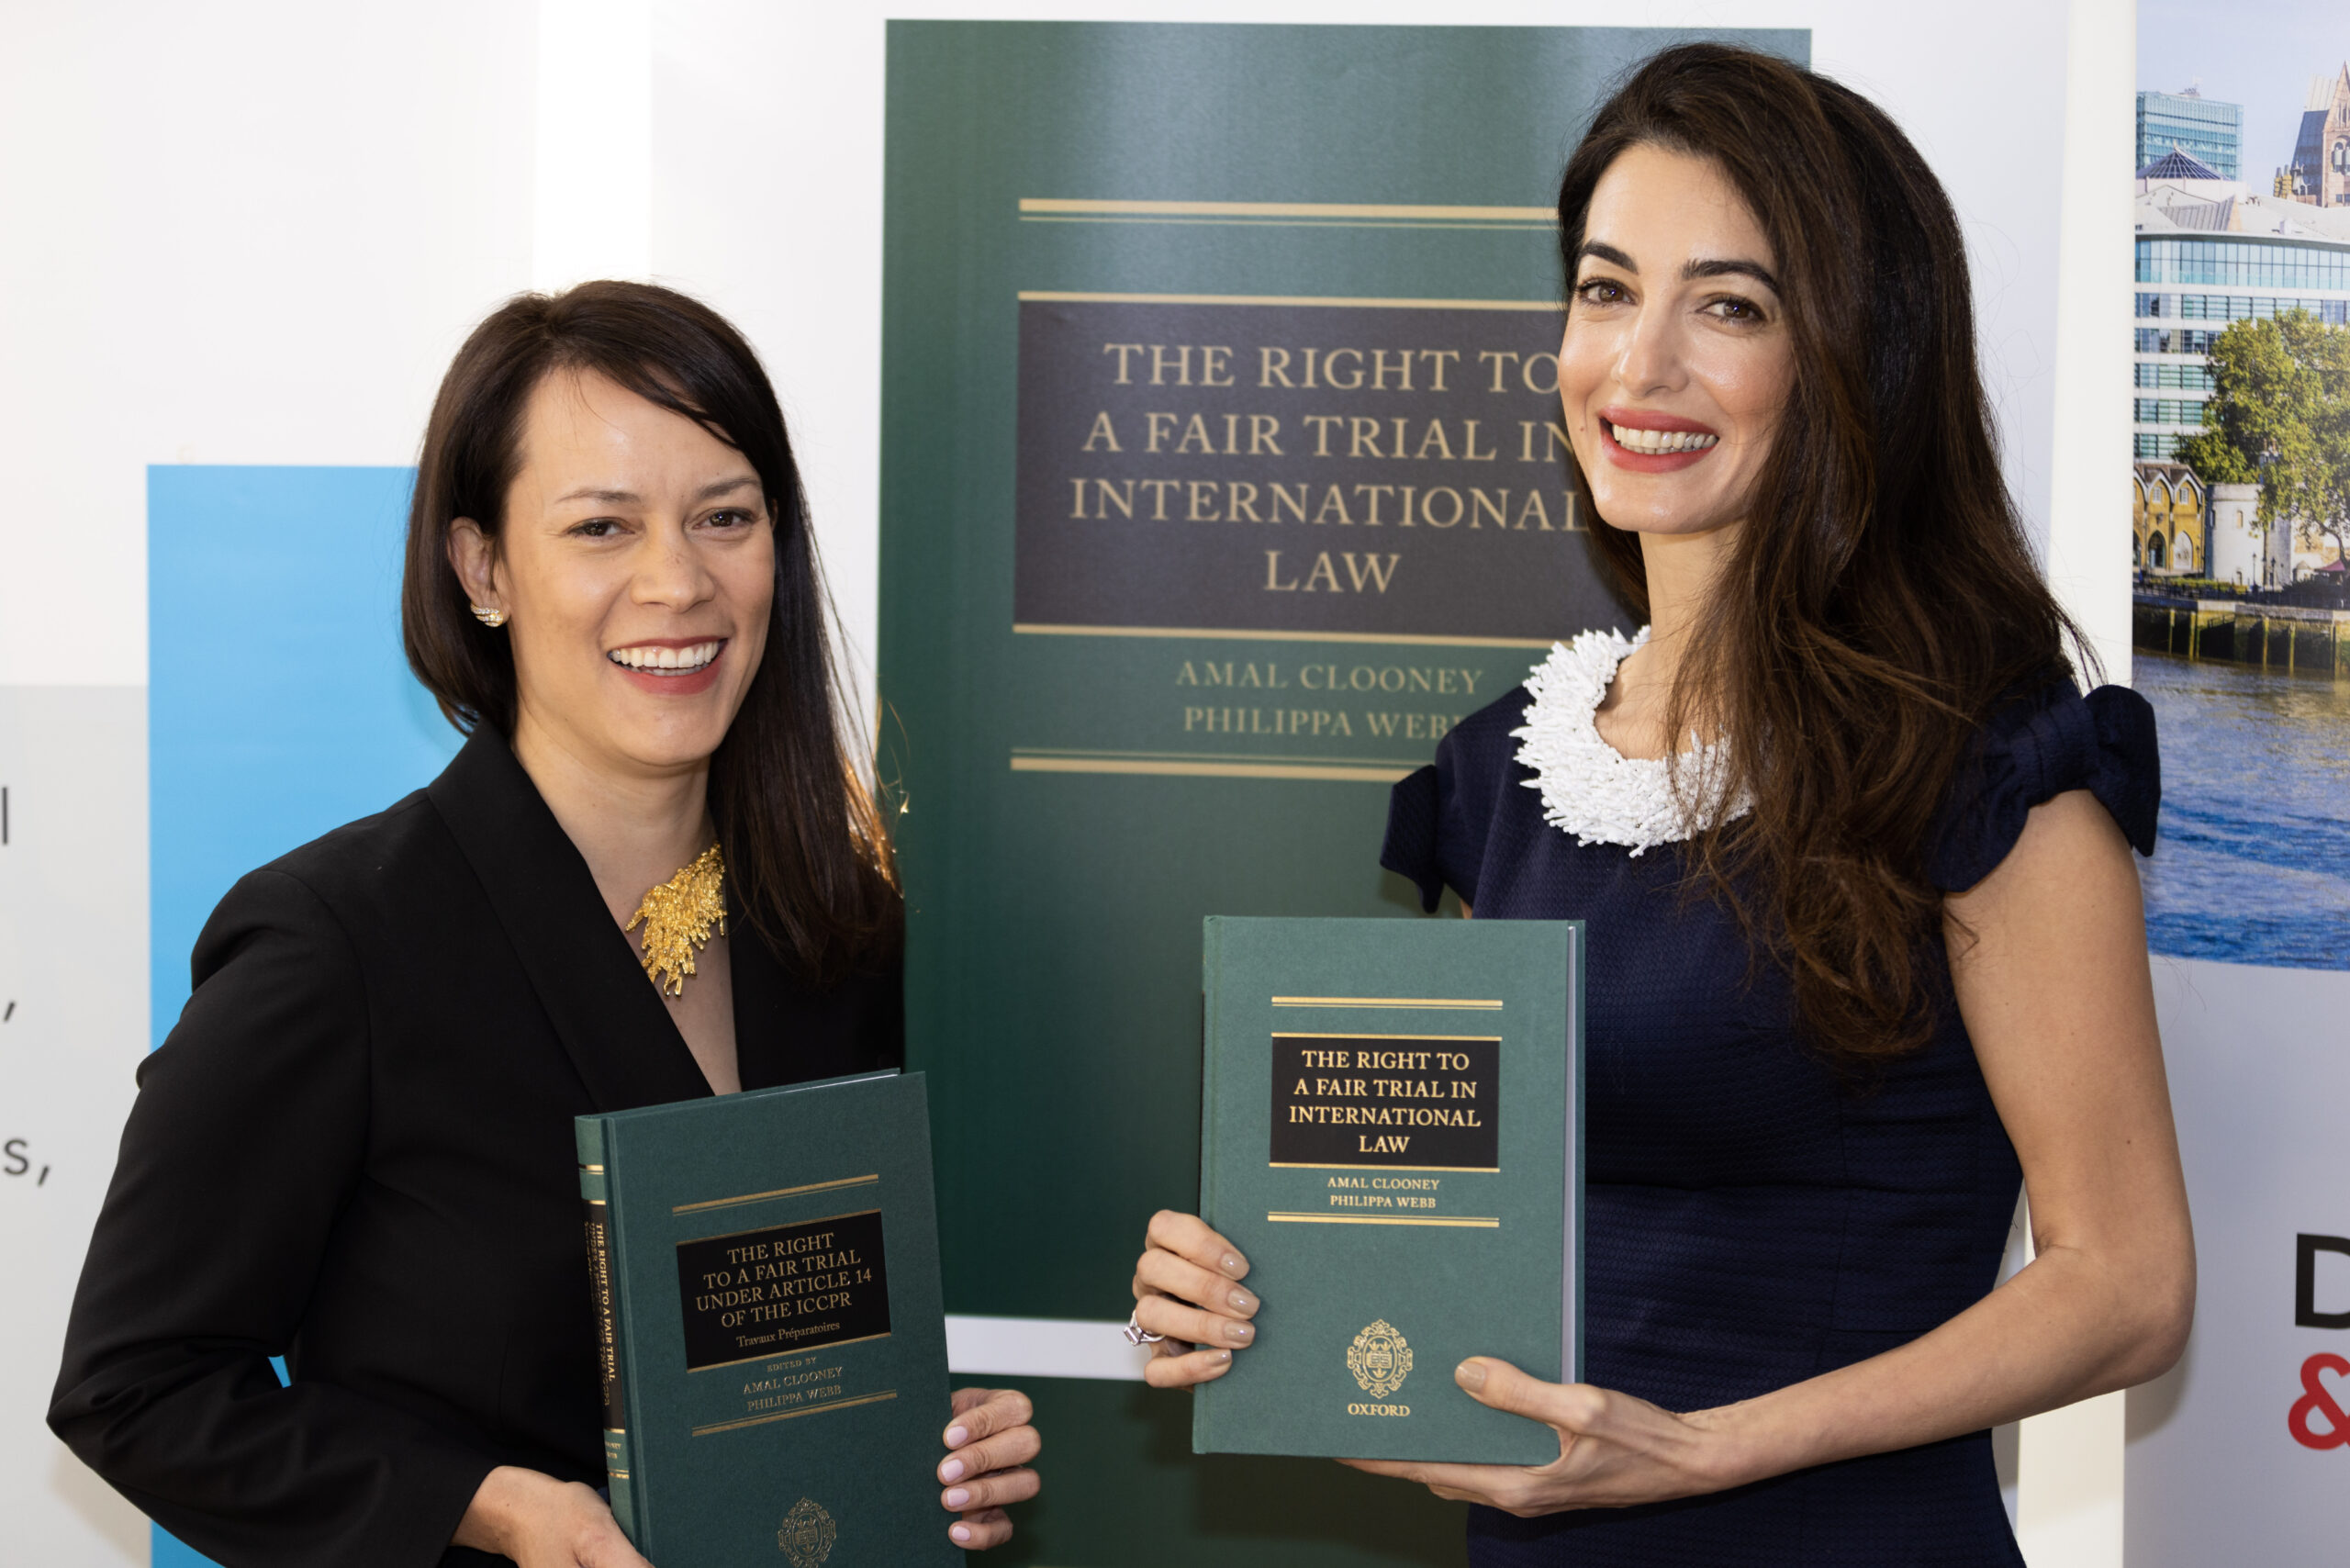 Philippa Webb and Amal Clooney hold copies of their book 'The Right to a Fair Trial in International Law'